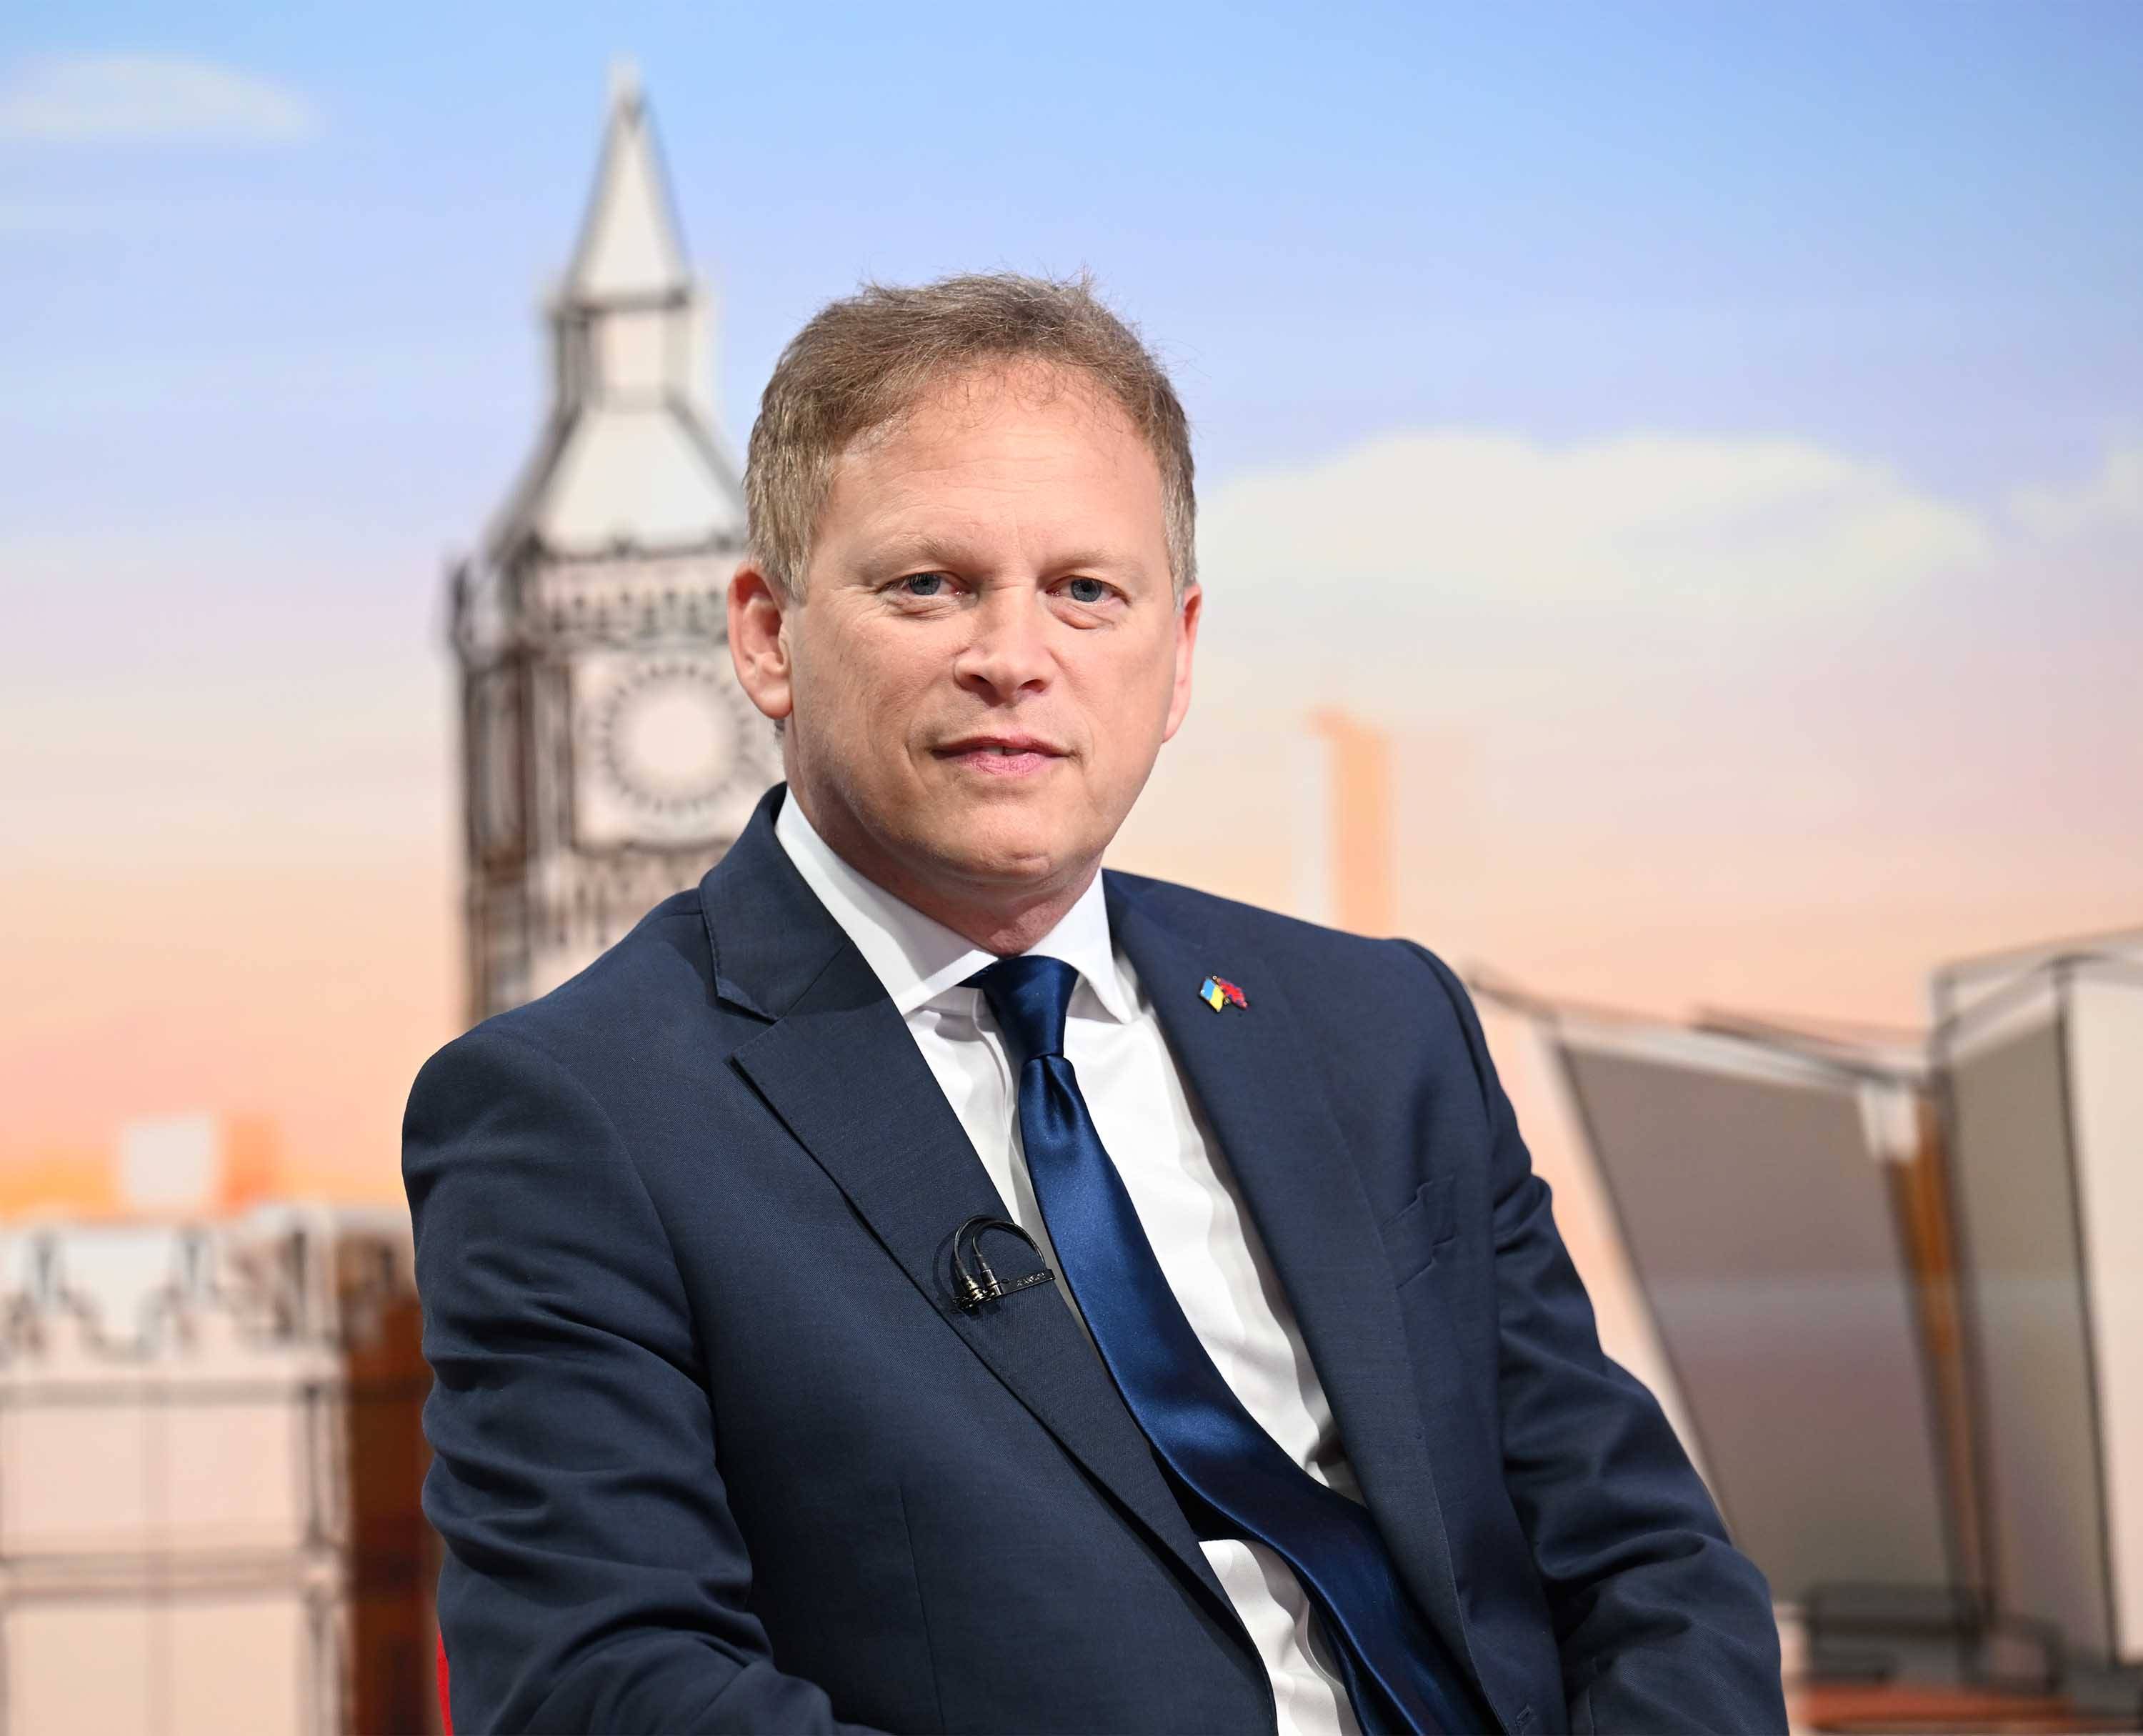   BBC handout photo of Defence Secretary Grant Shapps waiting to appear on the BBC 1 current affairs programme, Sunday With Laura Kuenssberg. Credit: Jeff Overs/BBC/PA Wire